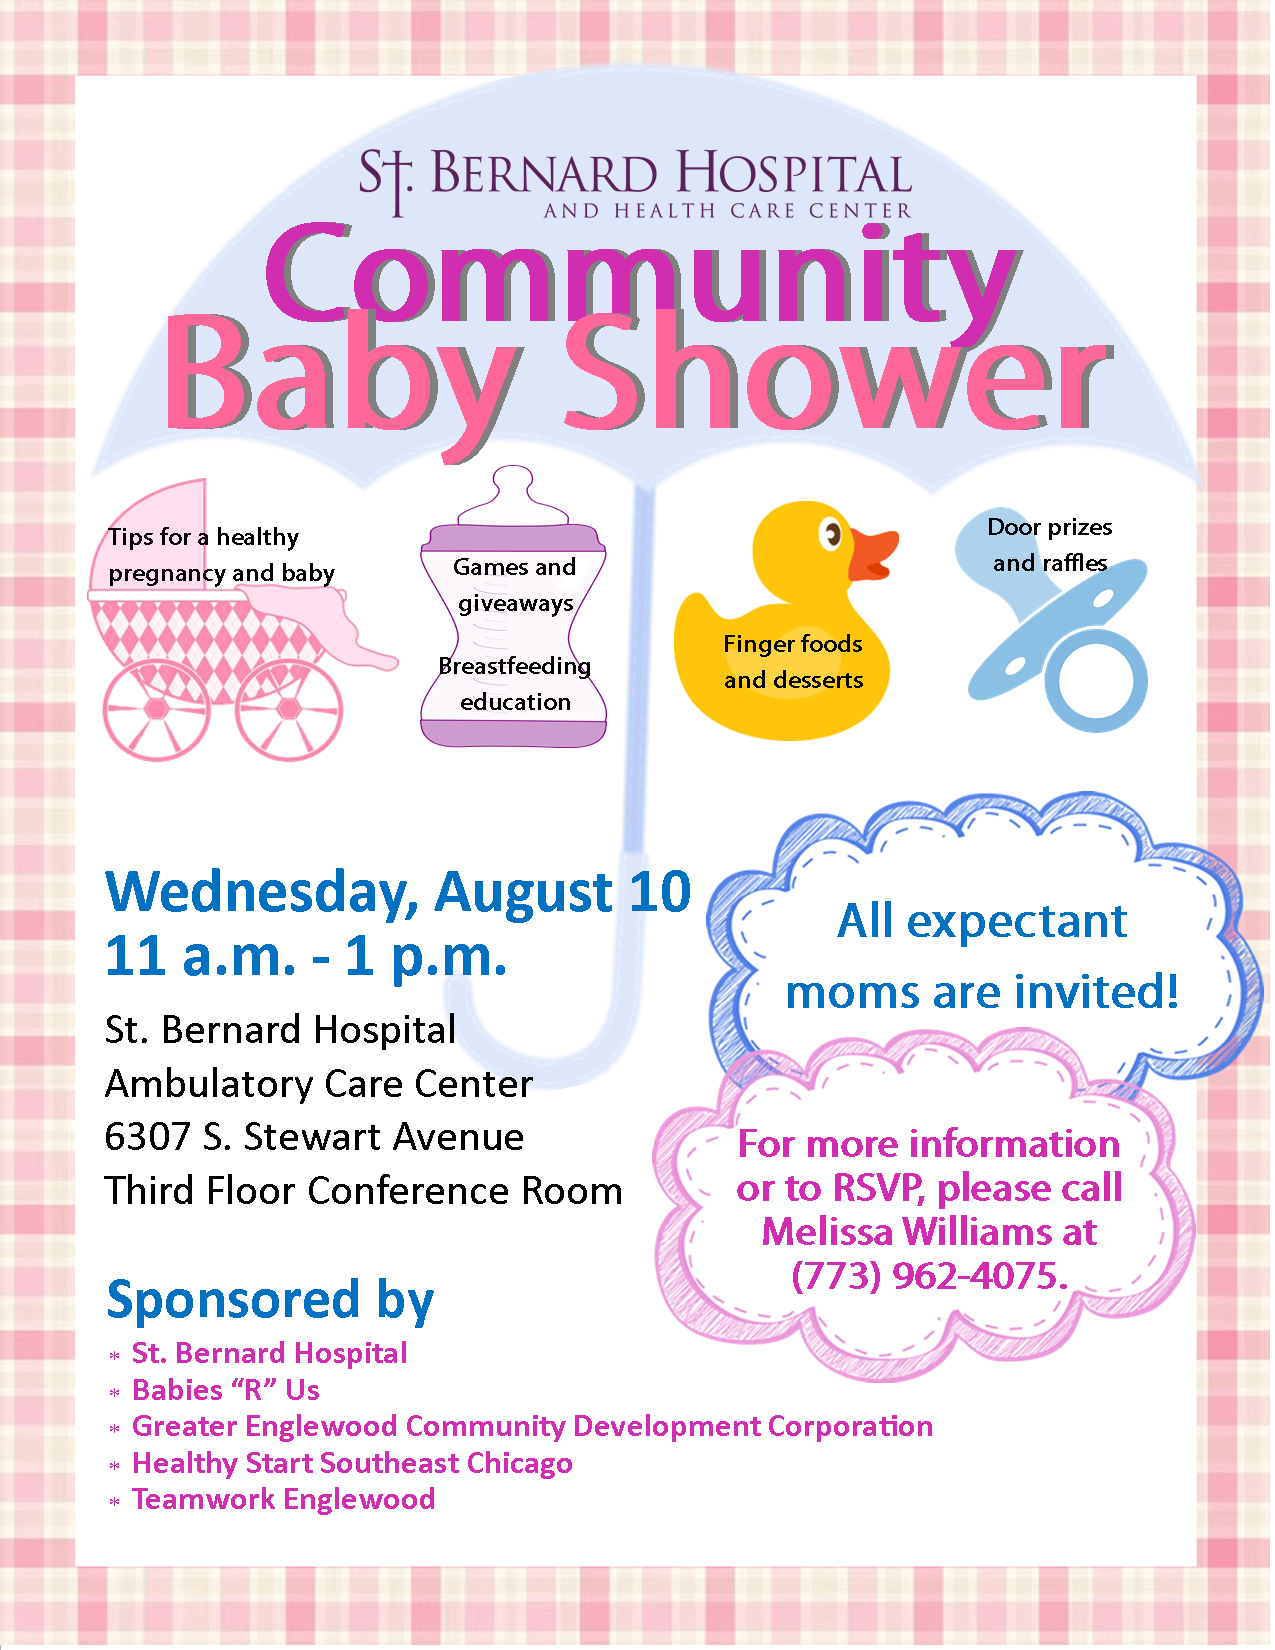 Free Places To Host A Baby Shower - BabyDam